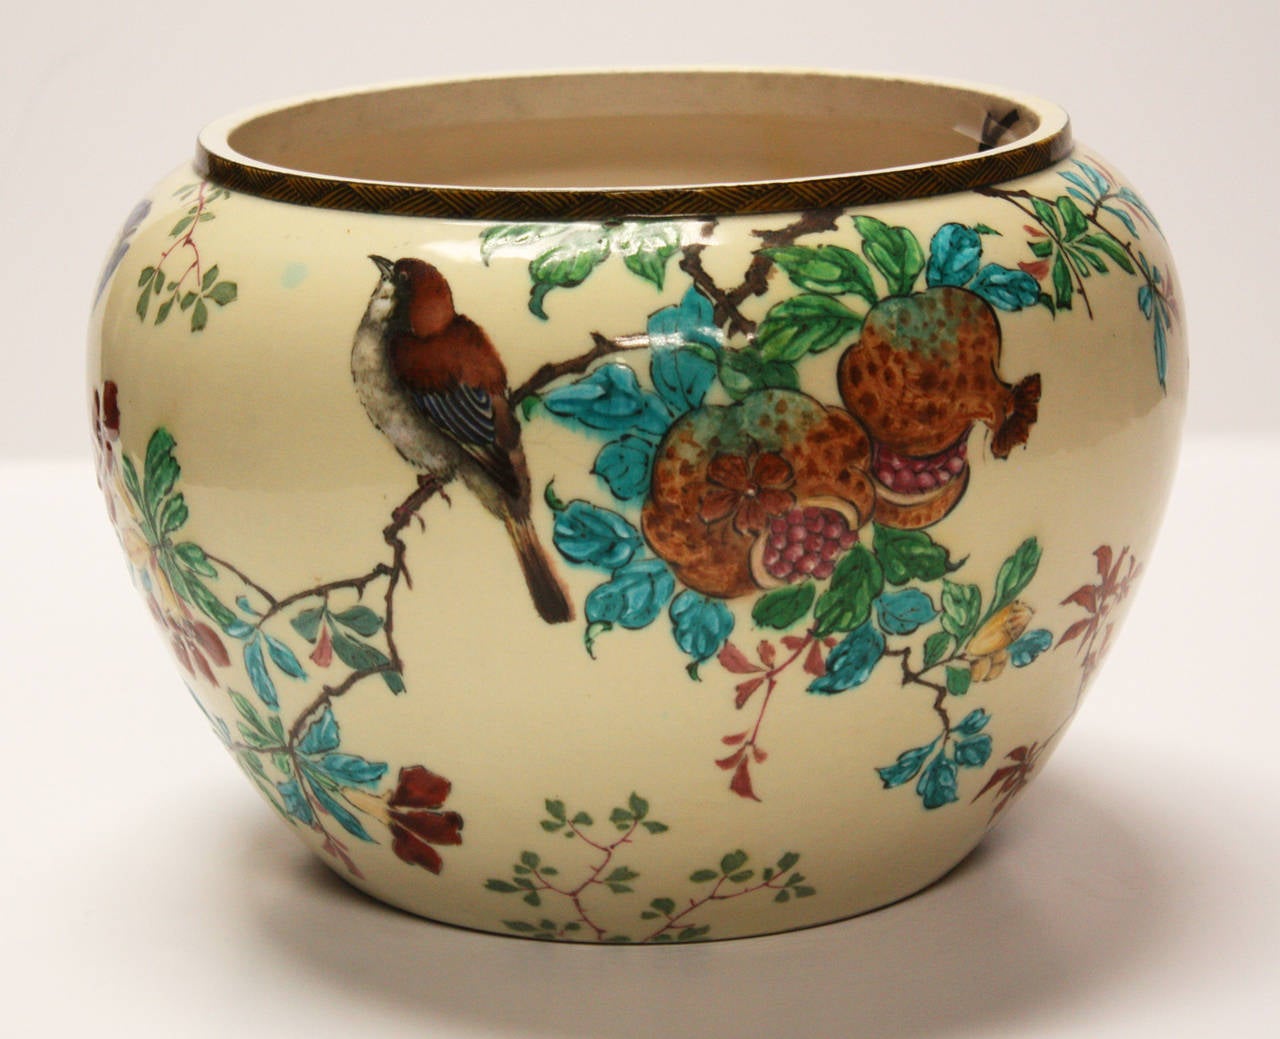 Antique hand decorated jardinière by artist Theodore Deck. Oriental influence with images of birds, butterflies and flowers executed in brilliantly colored enamel.